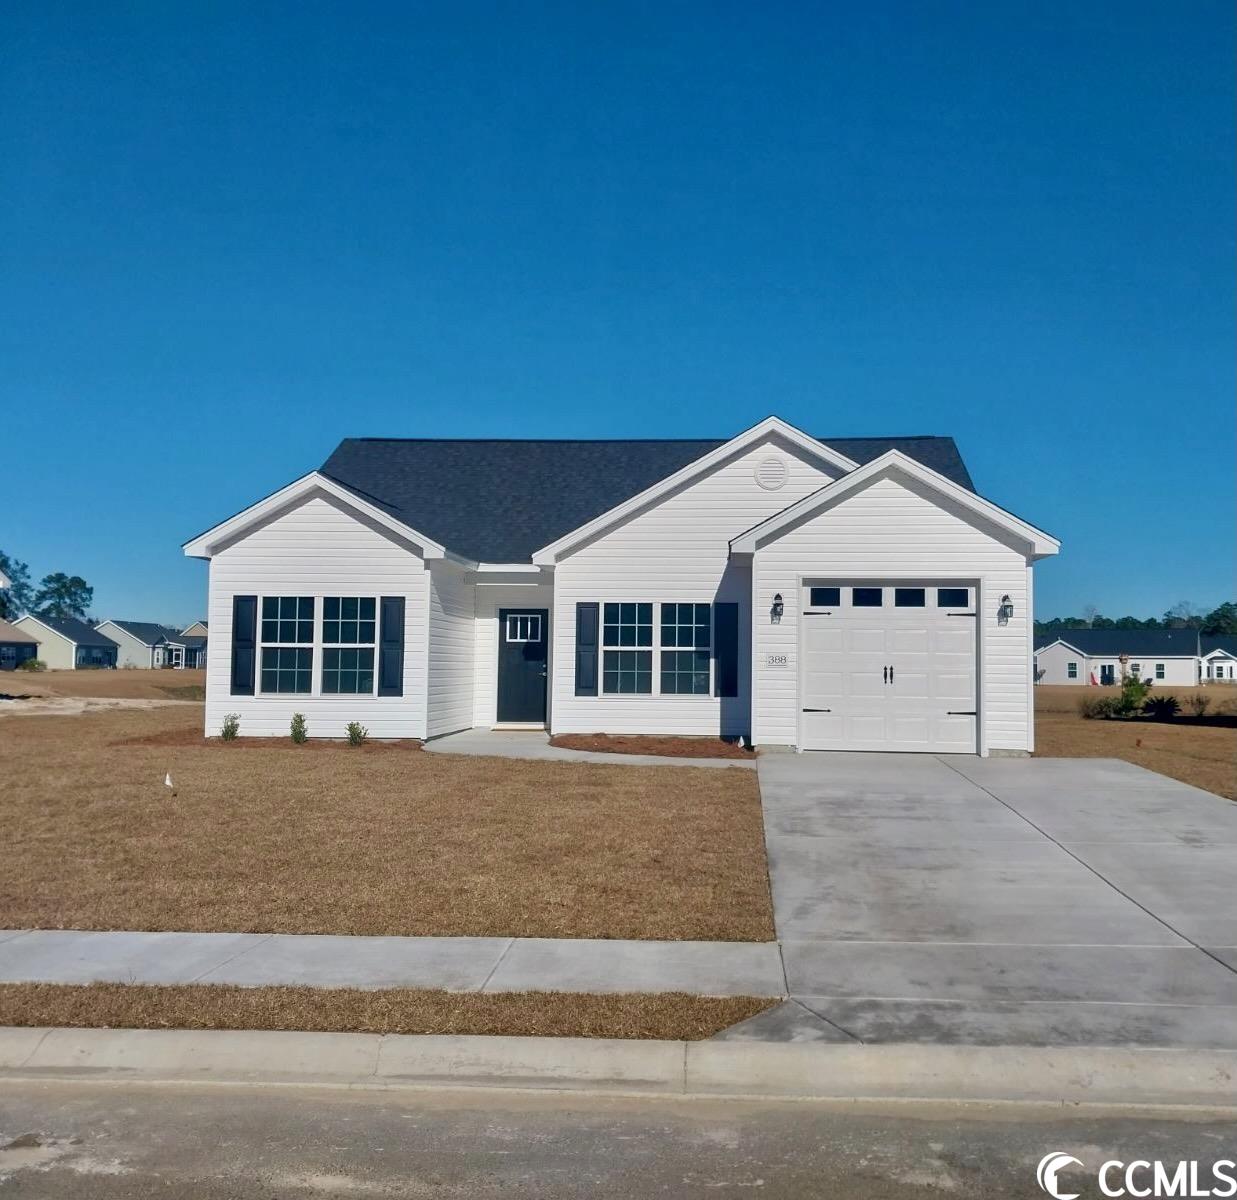 388 Shallow Cove Dr. Conway, SC 29527